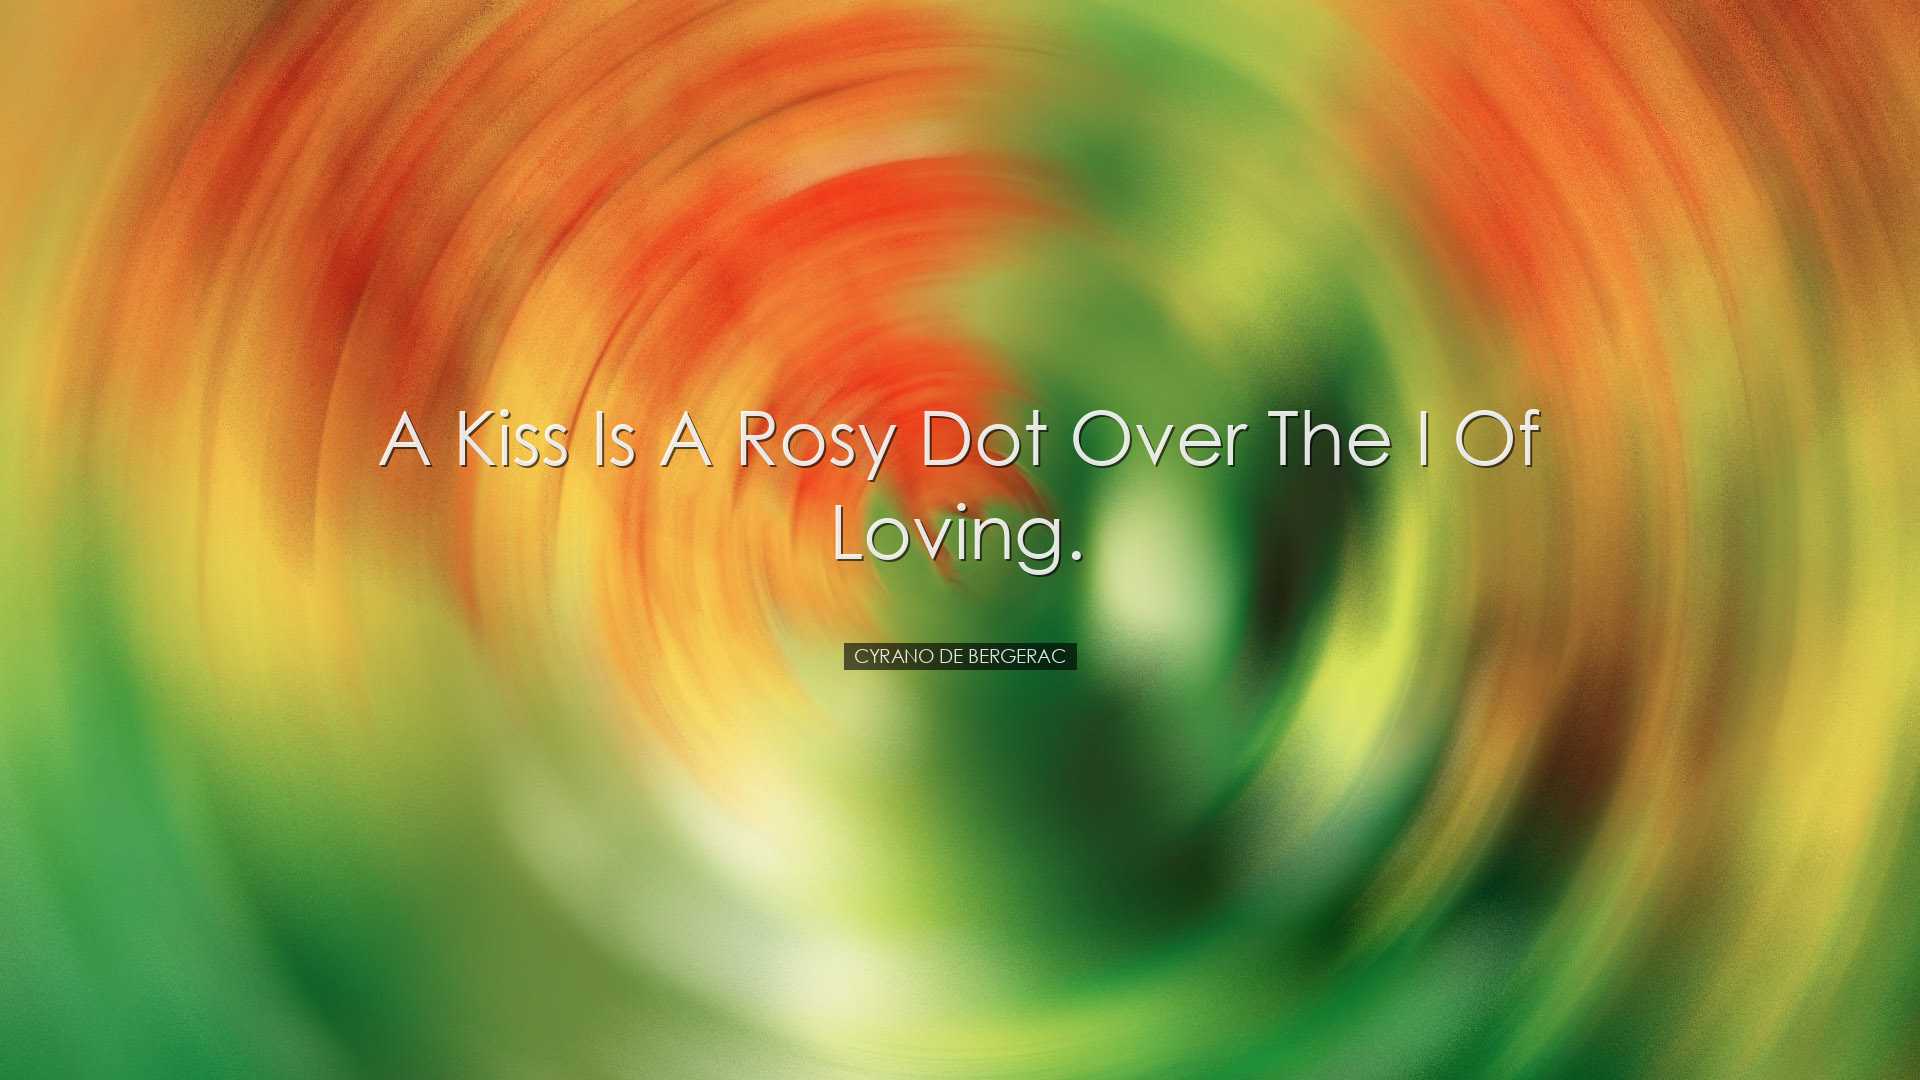 A kiss is a rosy dot over the i of loving. - Cyrano de Bergerac